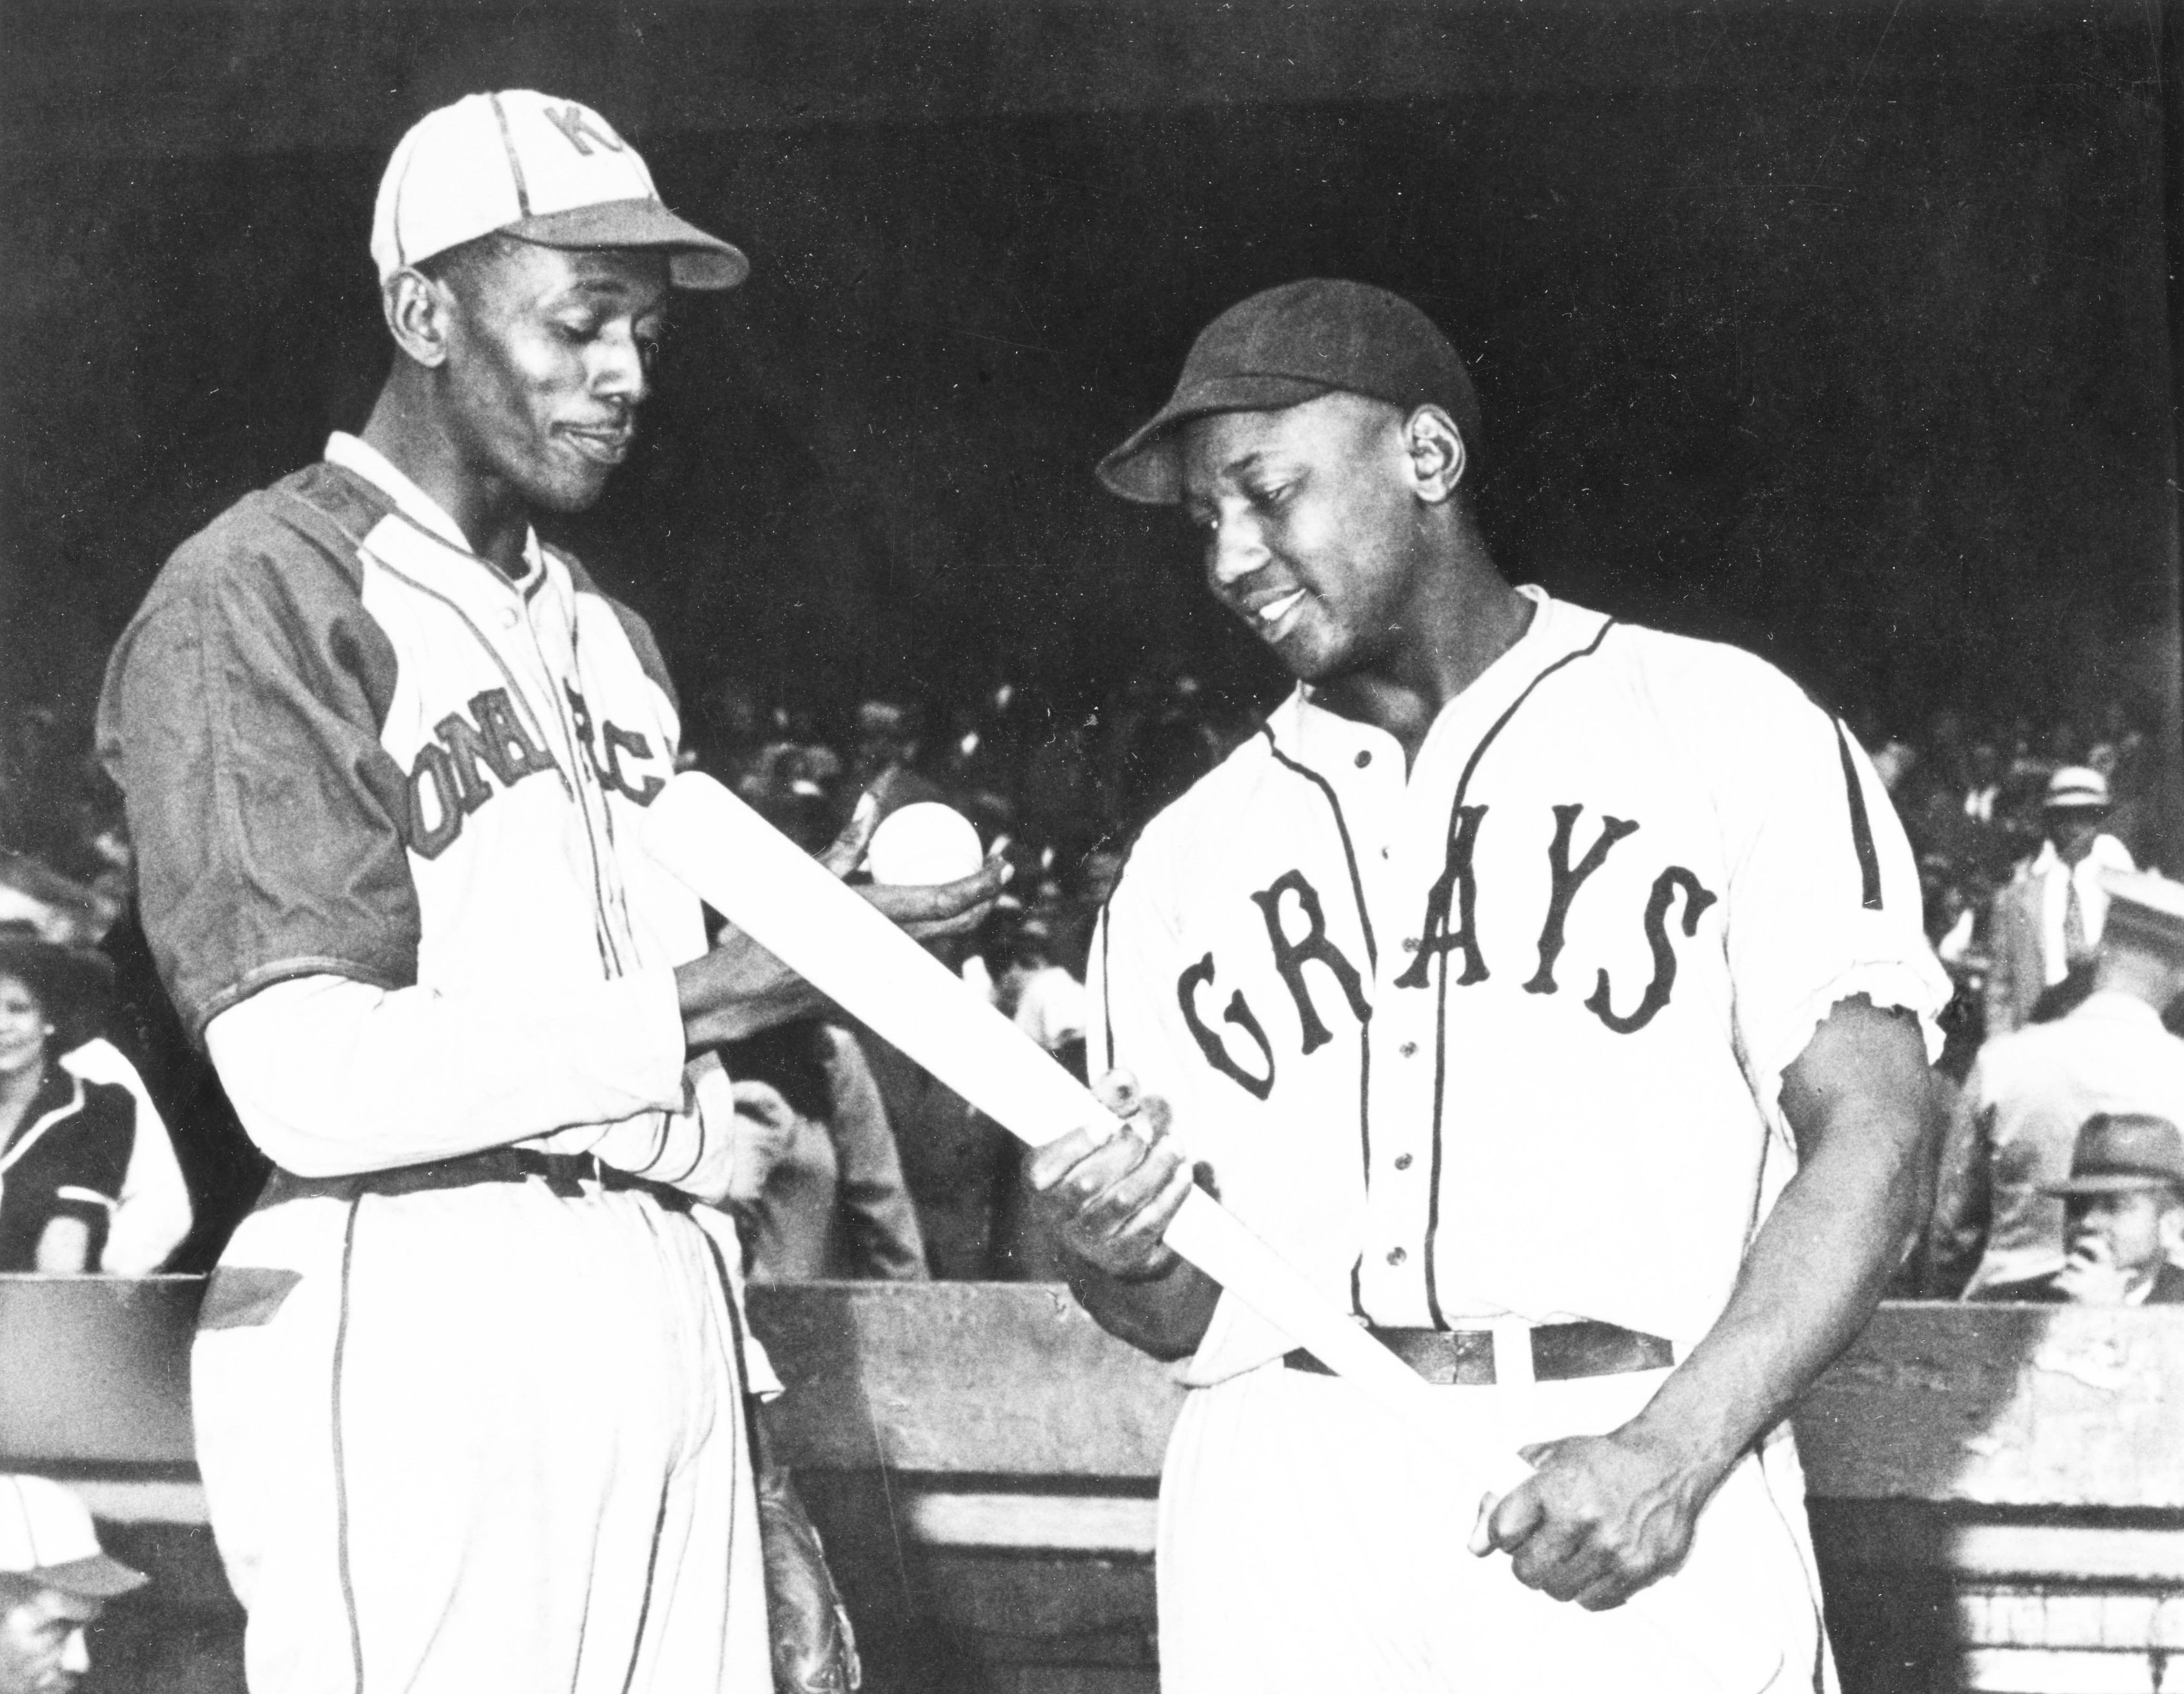 MLB is finally recognizing Negro Leagues stats, but Josh Gibson won't  become baseball's official home run king 